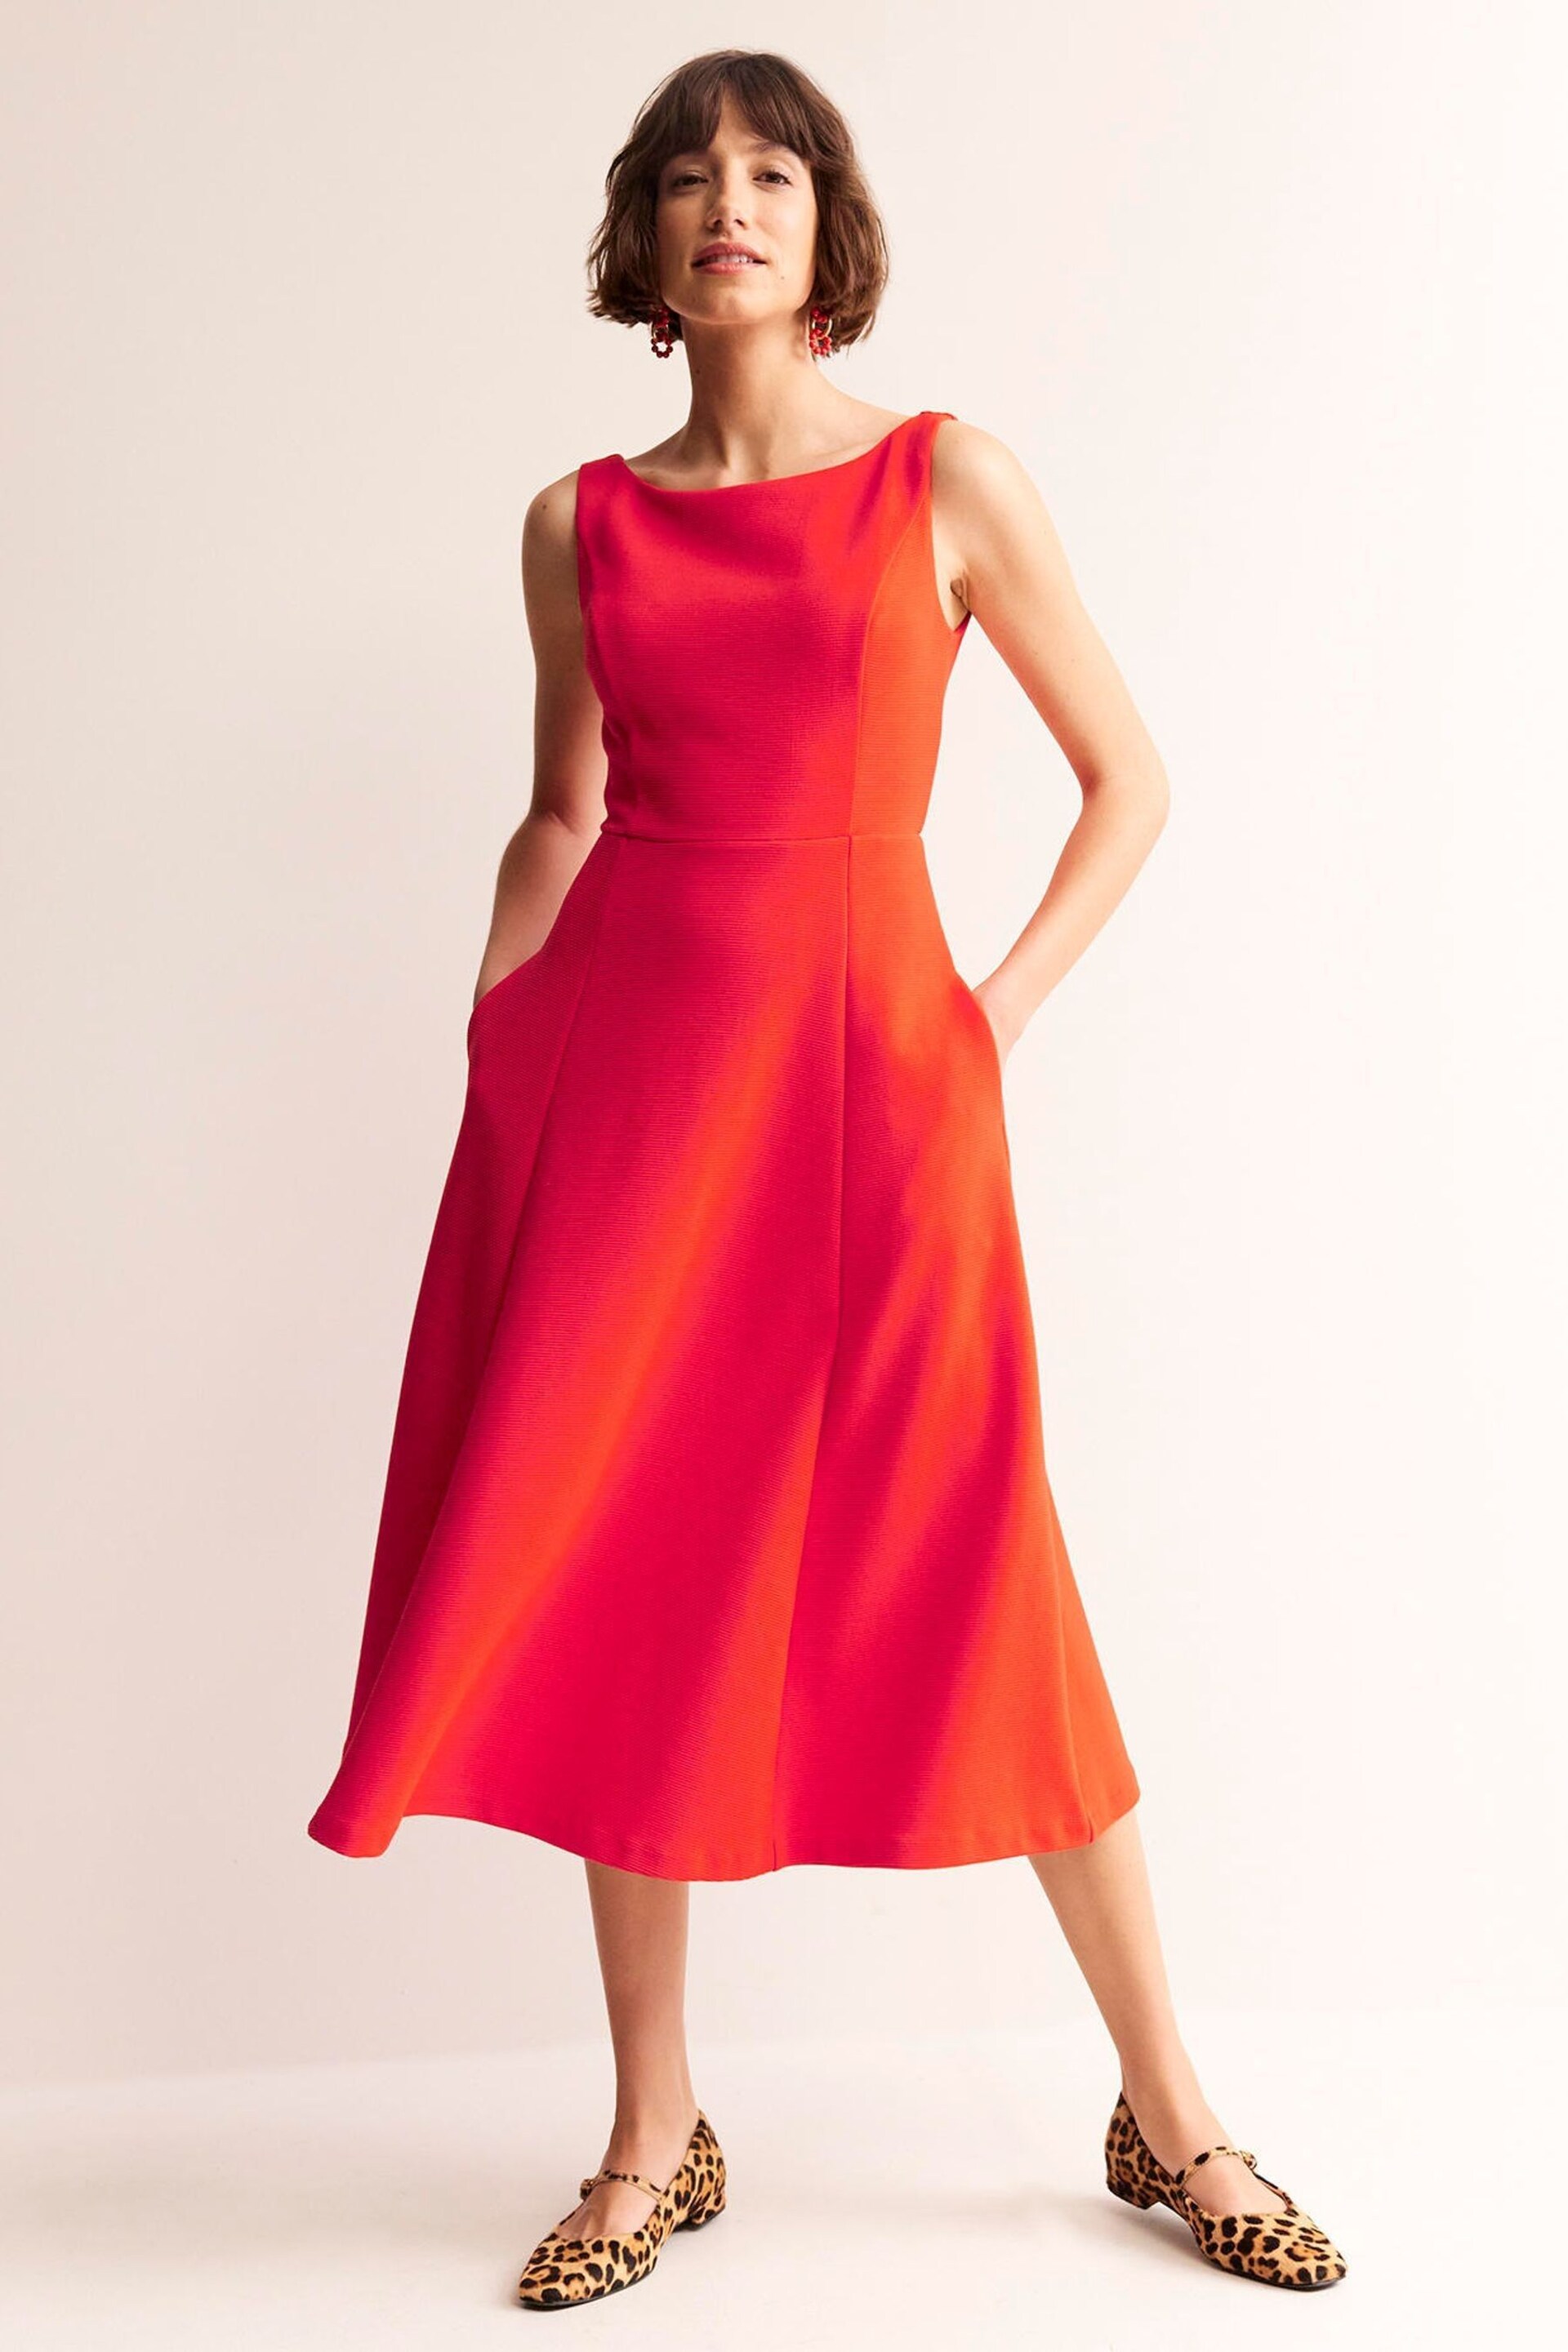 Boden Red Petite Scarlet Ottoman Ponte Dress - Image 4 of 5